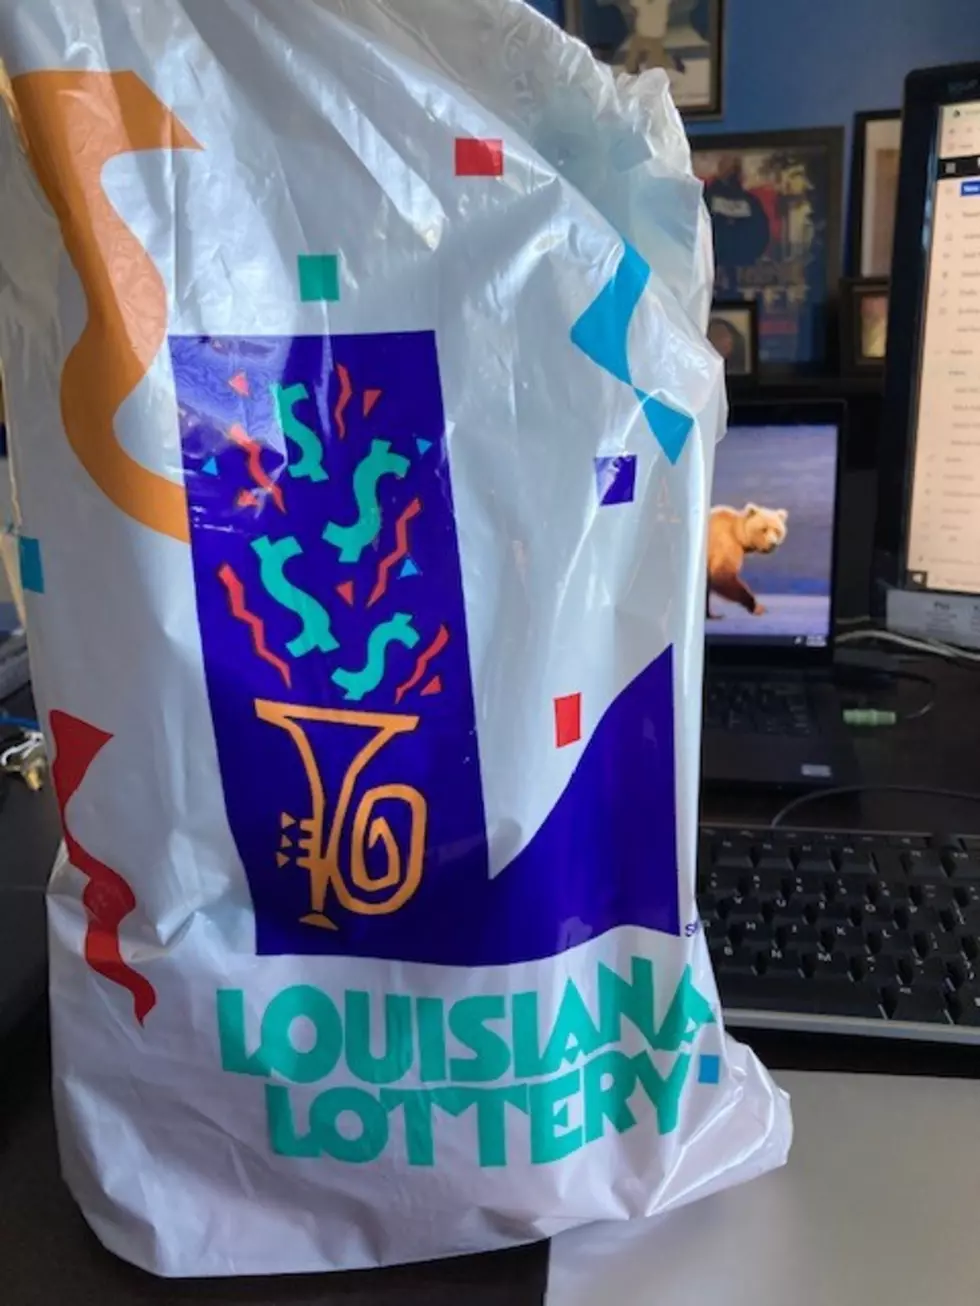 Louisiana Lottery Is In The Gift Of Giving This Christmas